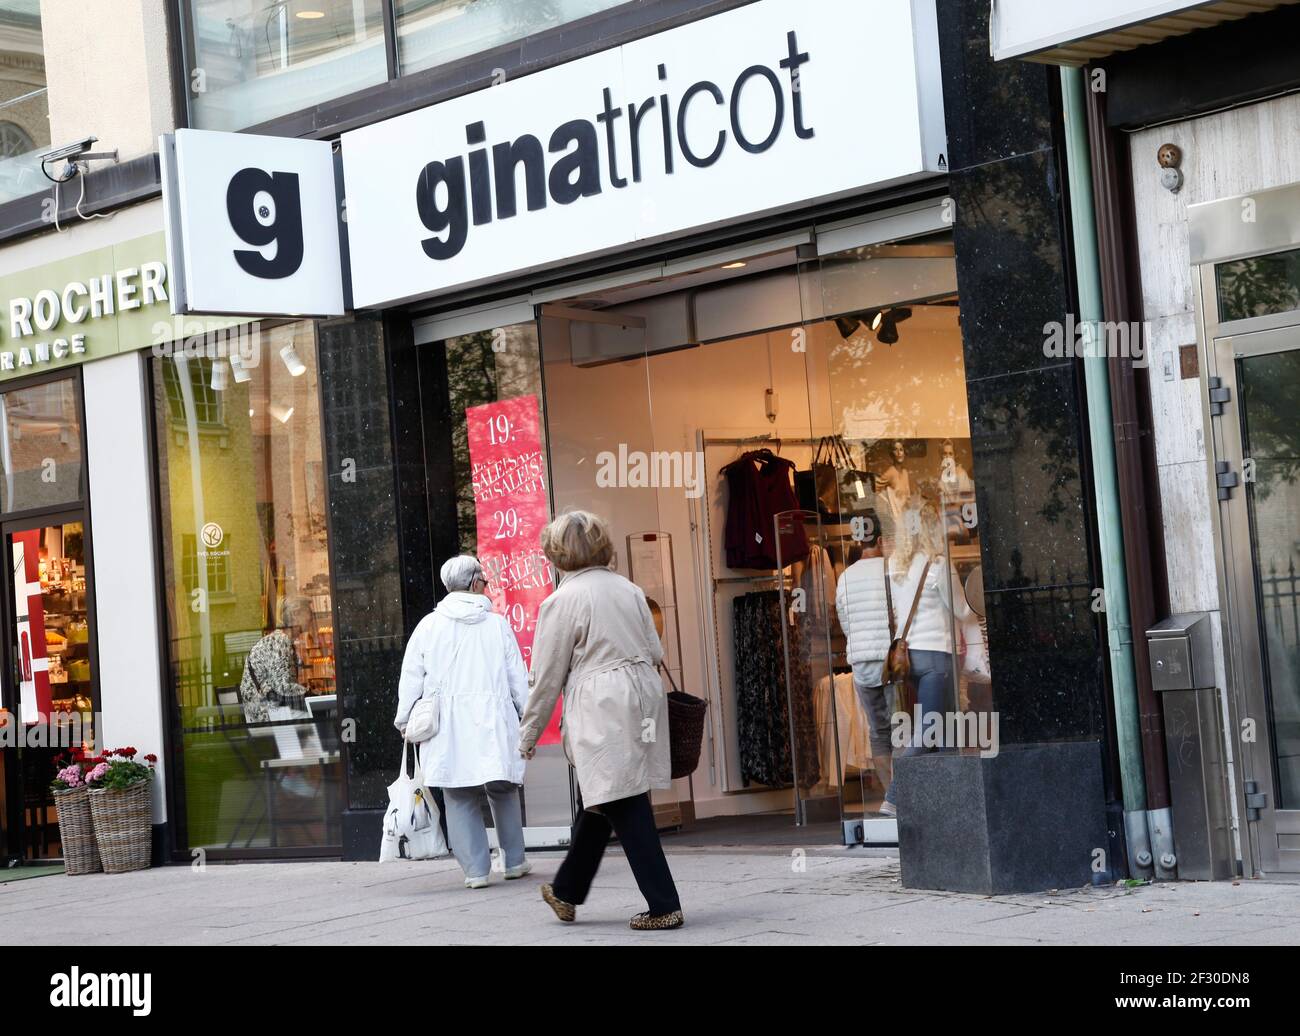 Gina Tricot. Gina Tricot is a Swedish fashion chain that offers clothes to  women in over 30 countries Stock Photo - Alamy